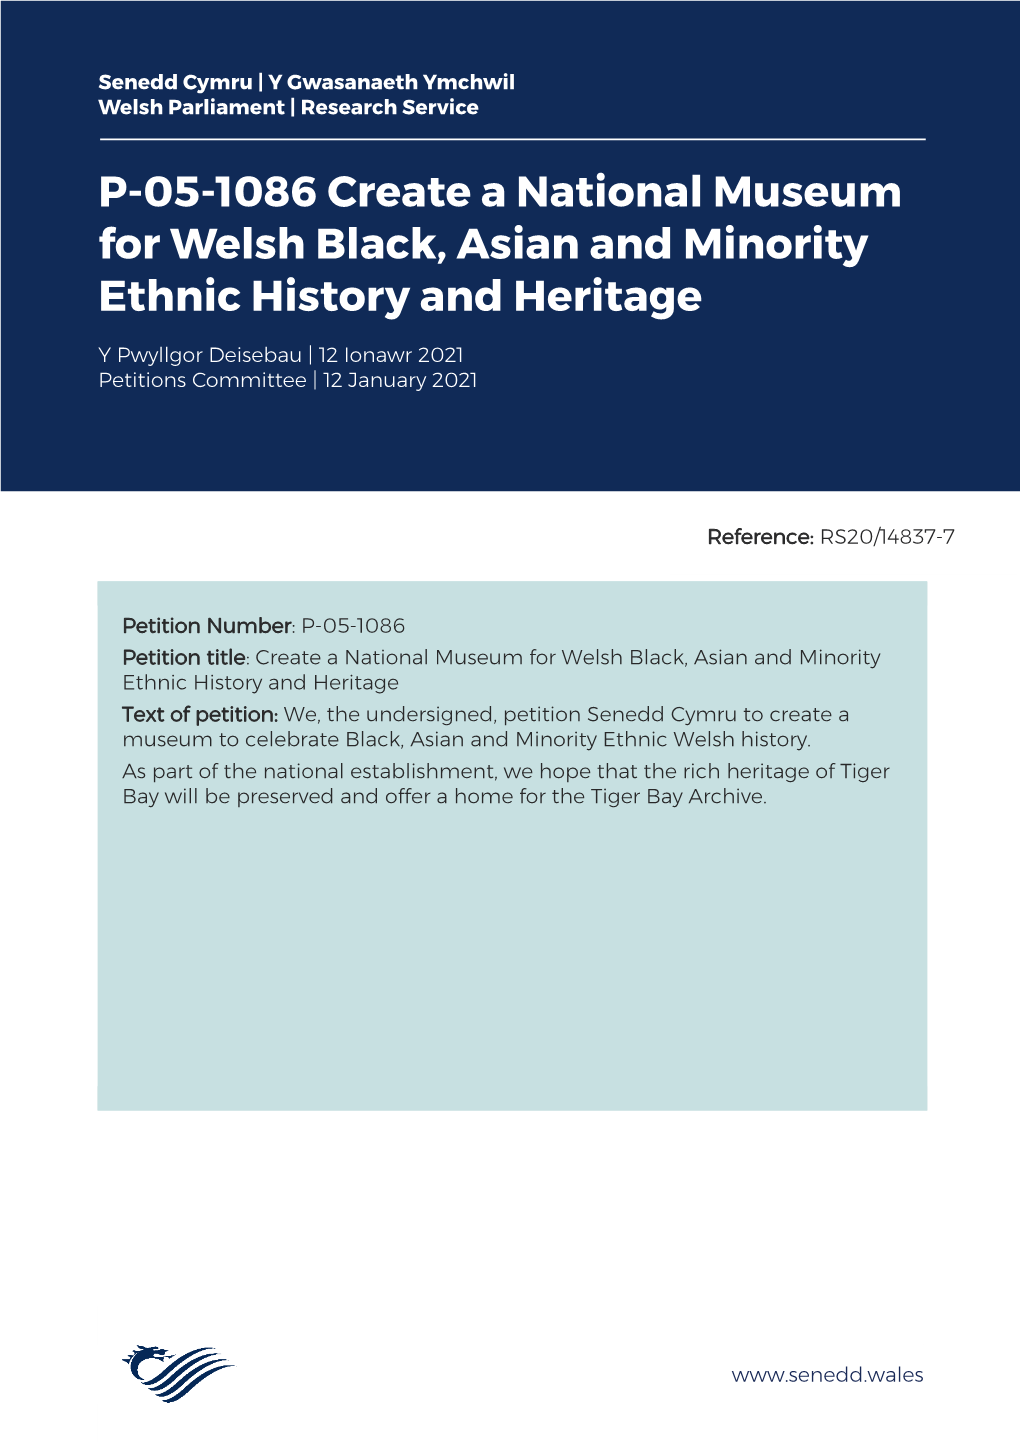 P-05-1086 Create a National Museum for Welsh Black, Asian and Minority Ethnic History and Heritage